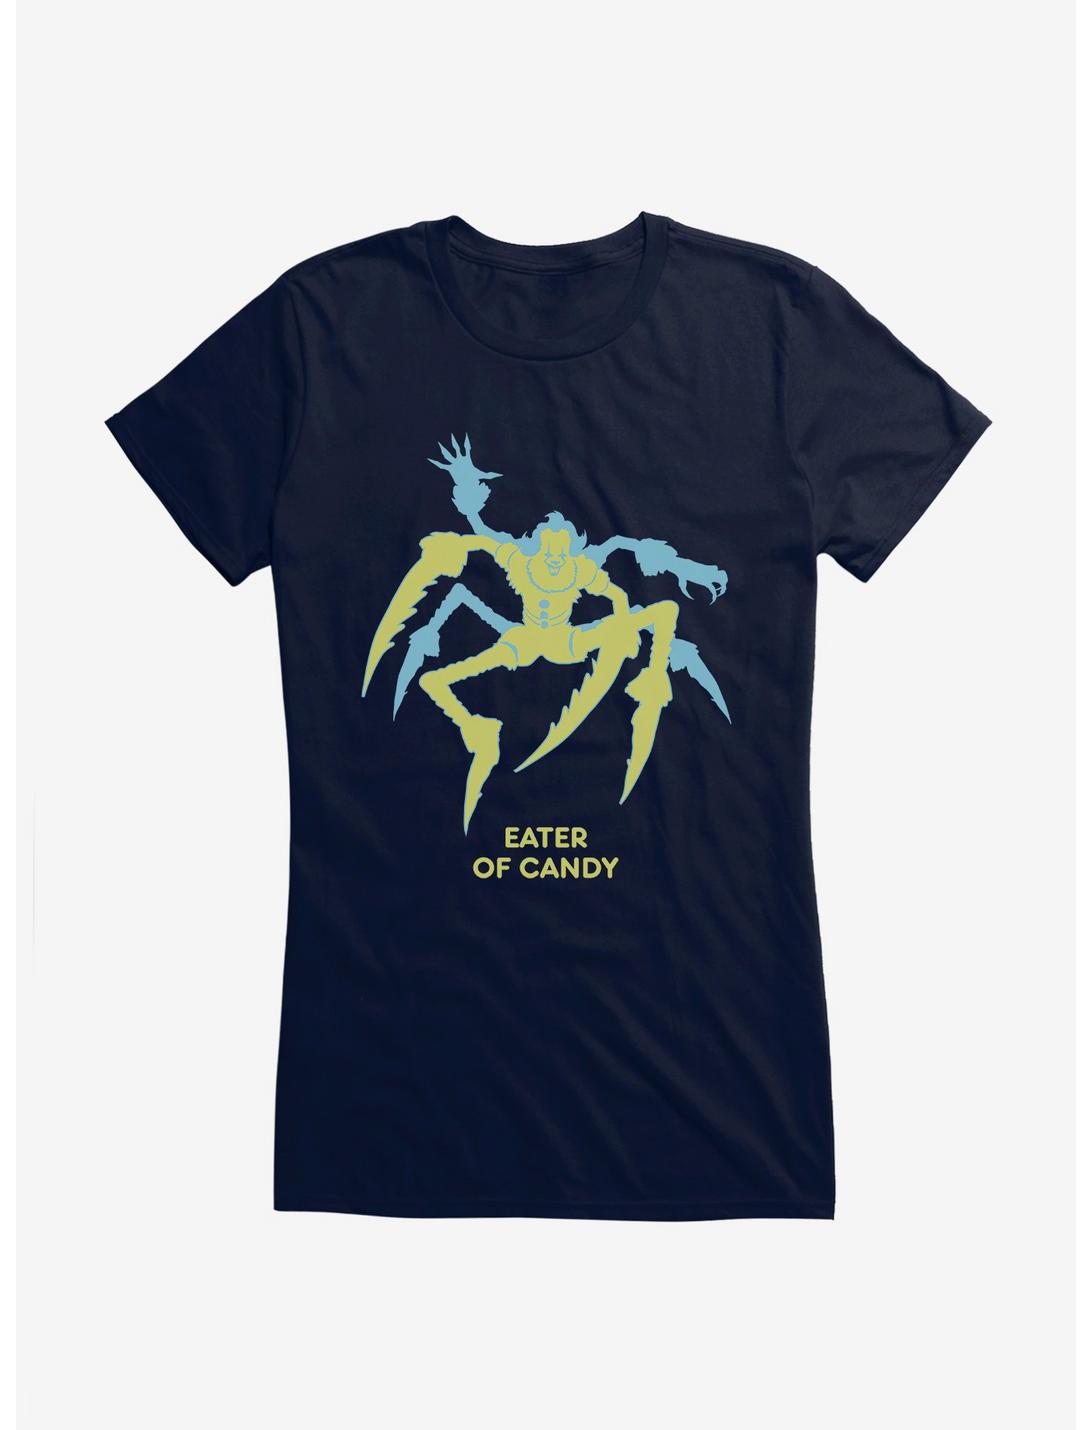 IT2 Eater Of Candy Girls T-Shirt, NAVY, hi-res